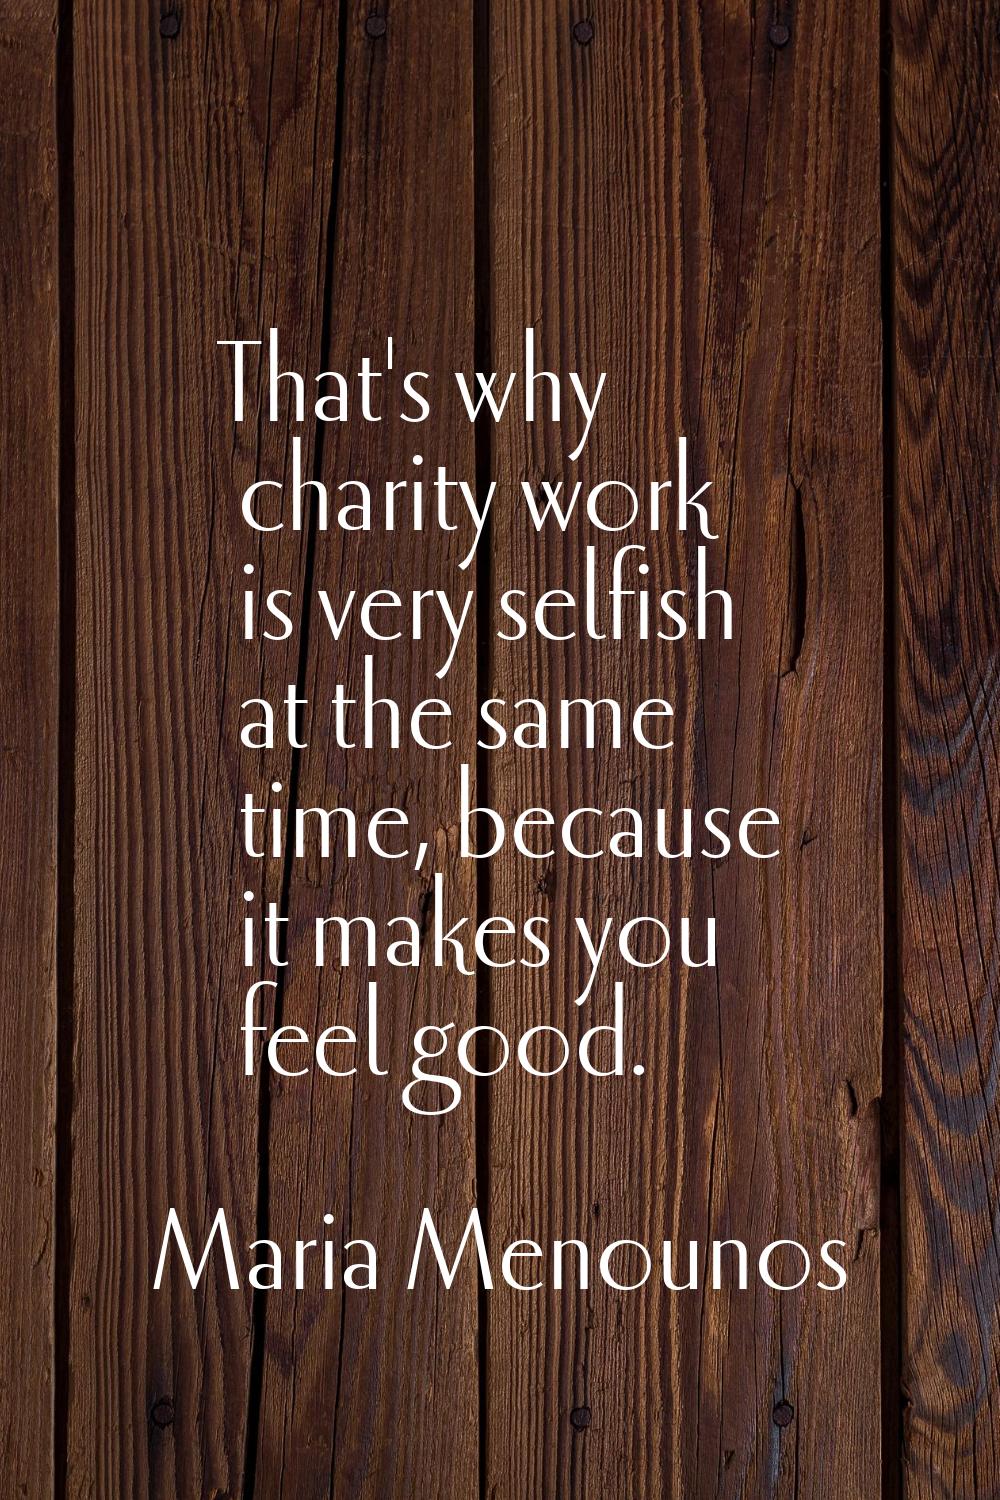 That's why charity work is very selfish at the same time, because it makes you feel good.